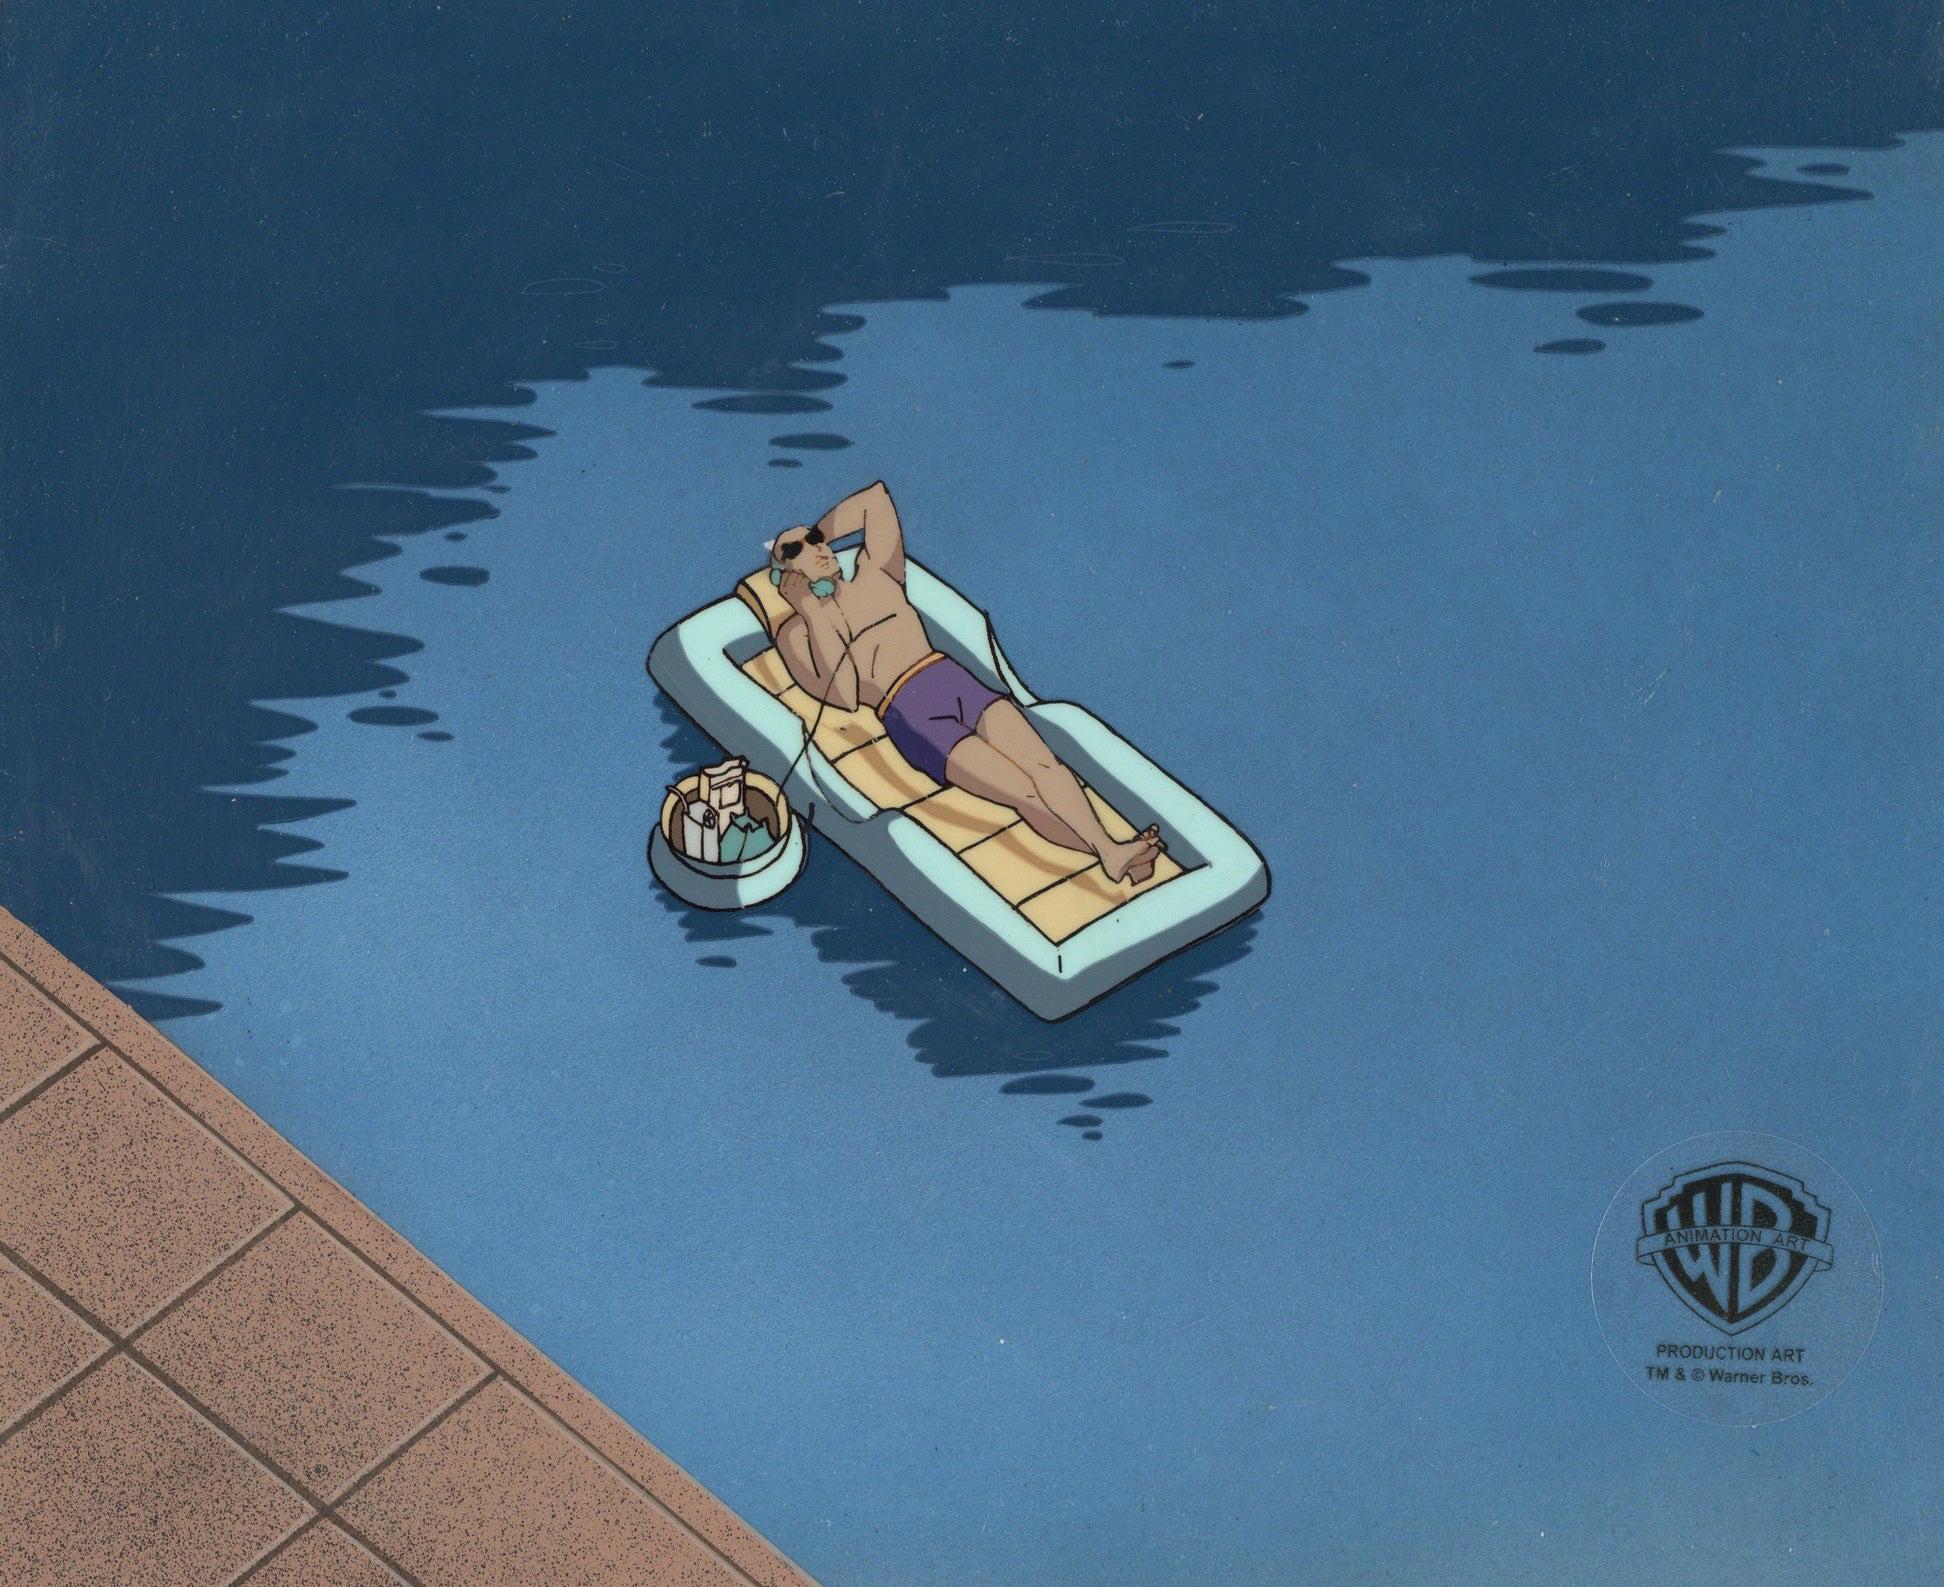 Batman The Animated Series Original Production Cel & Background: Alfred - Art by DC Comics Studio Artists